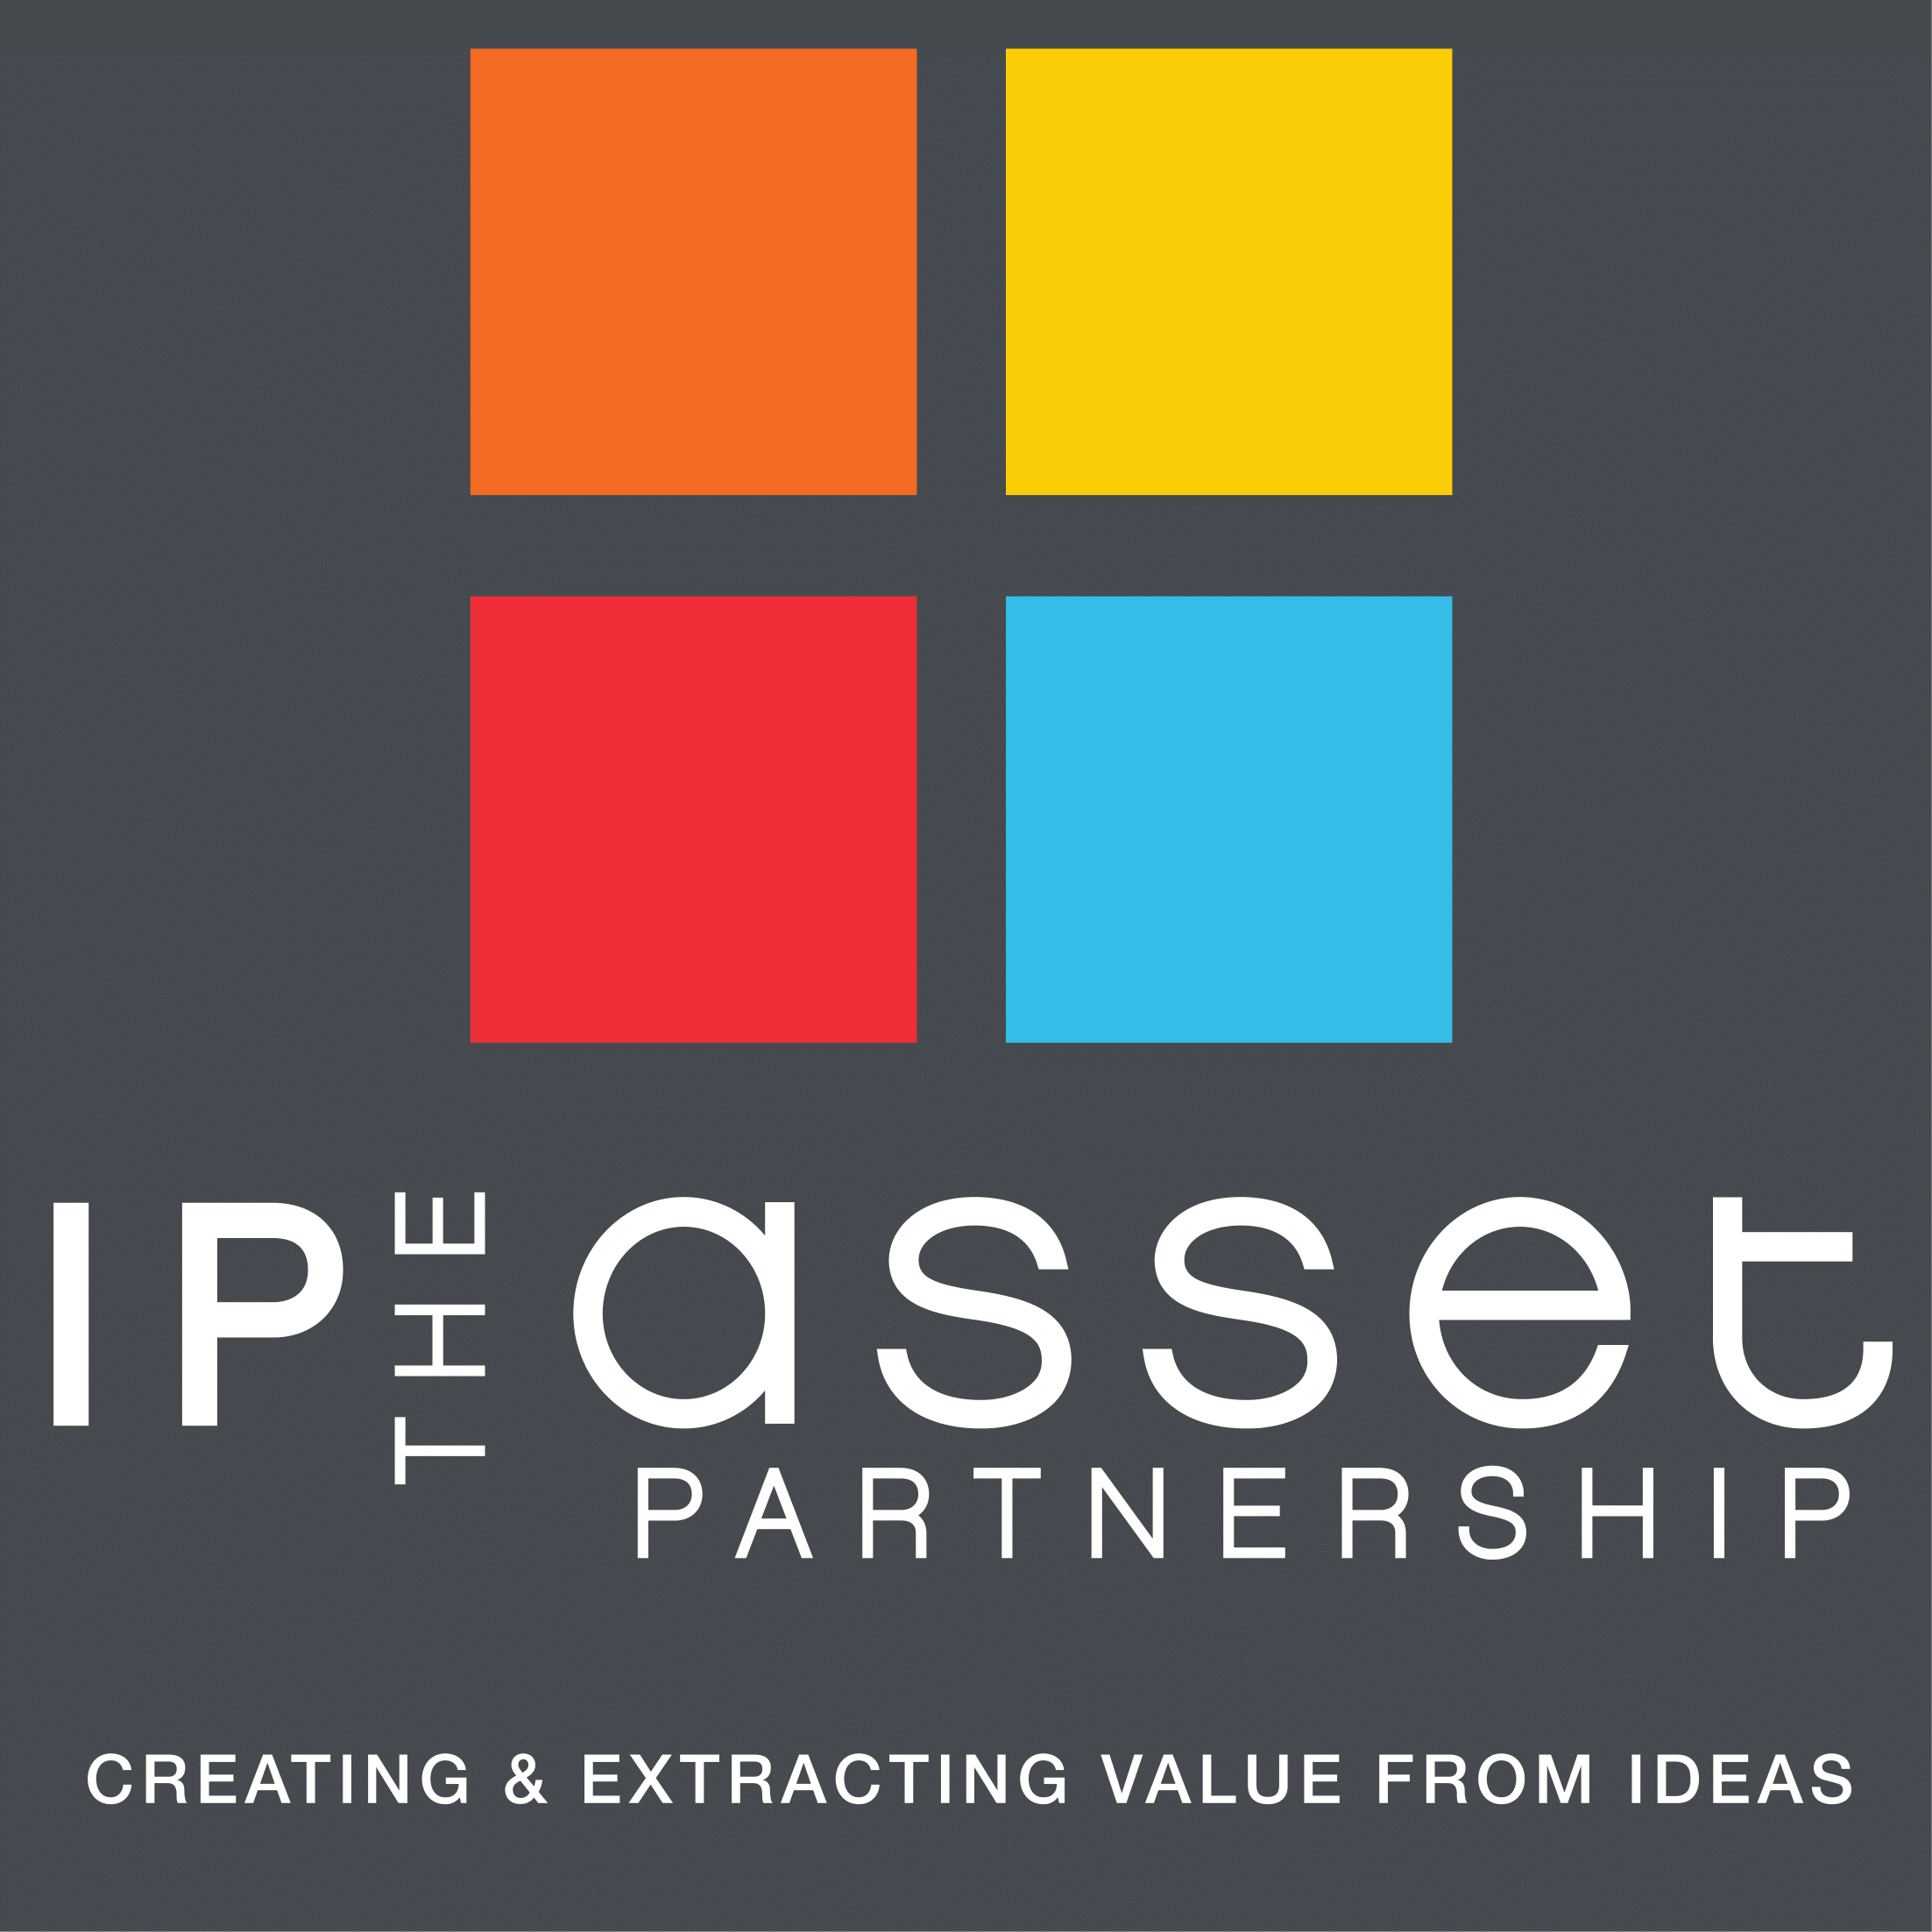 The IP Asset Partnership are supporting Status Row